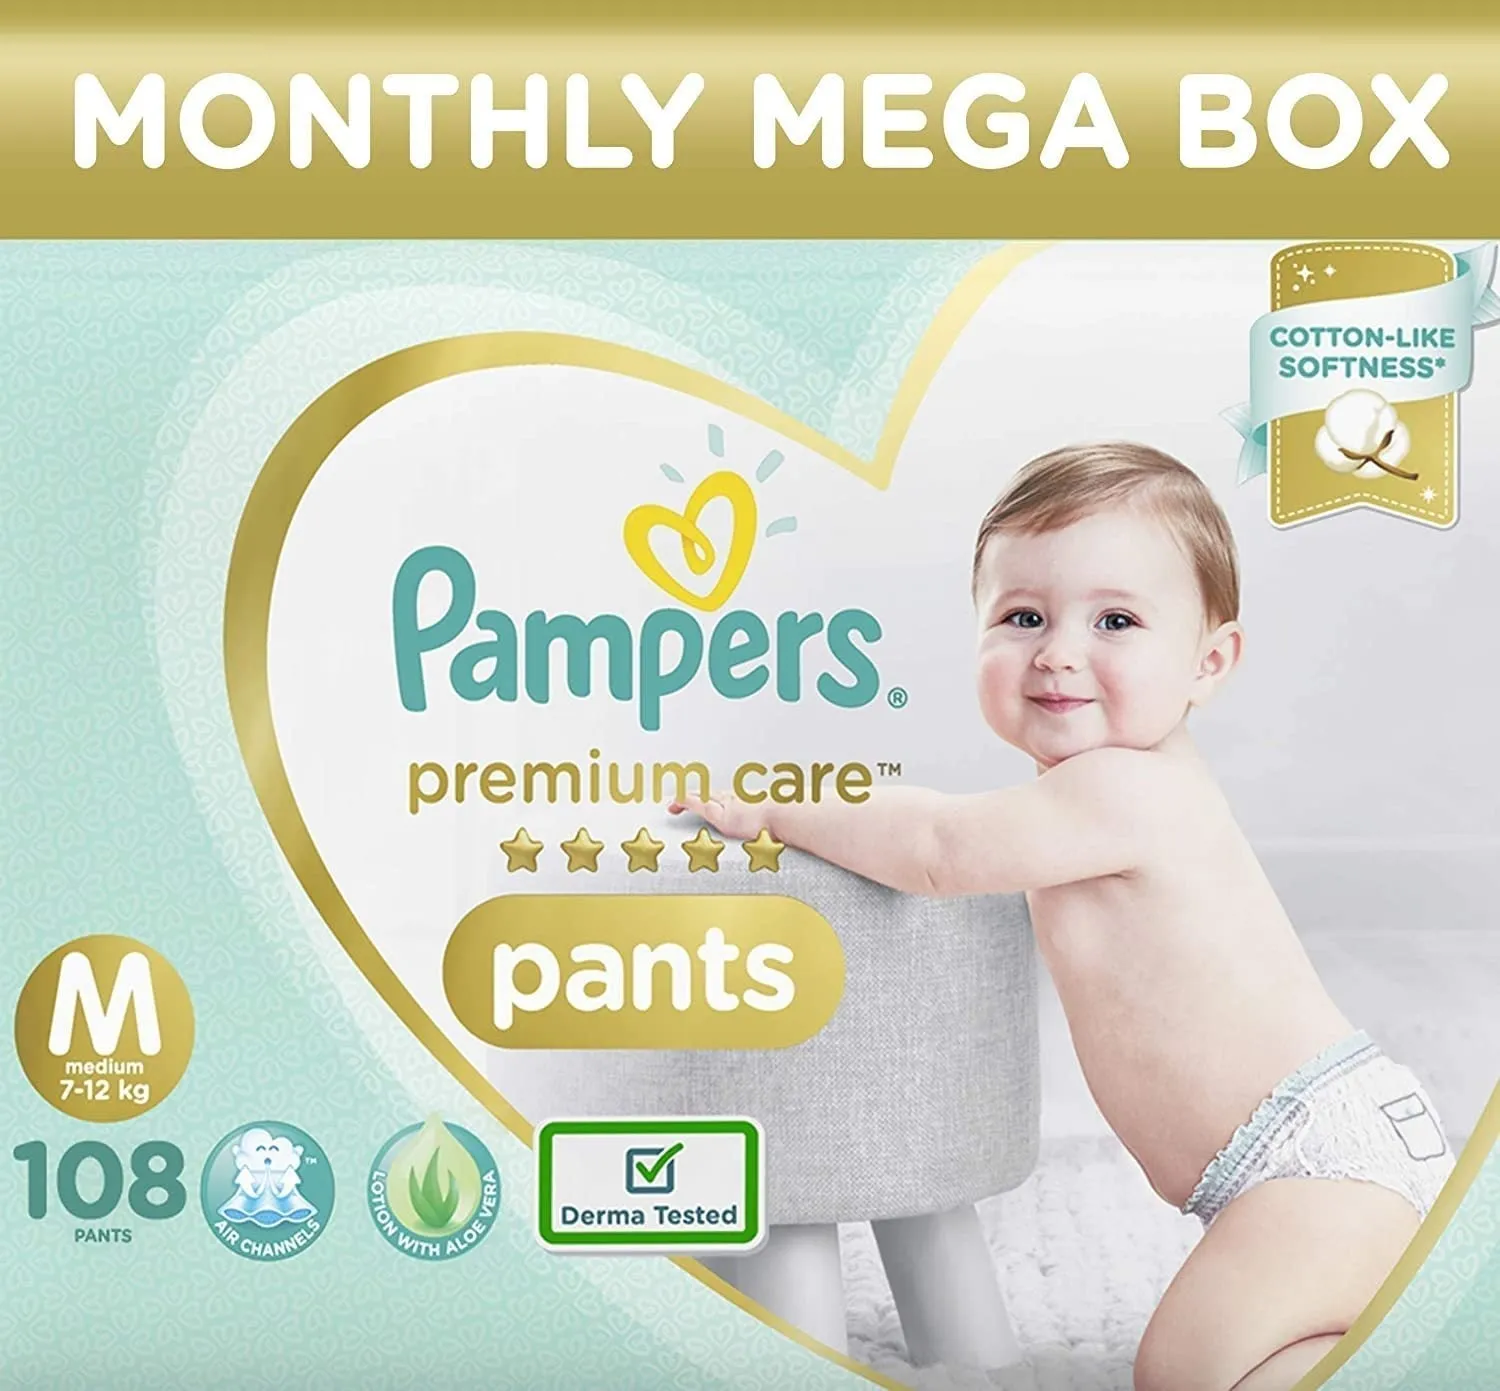 Pampers Premium Care Pants  Used and Reviewed